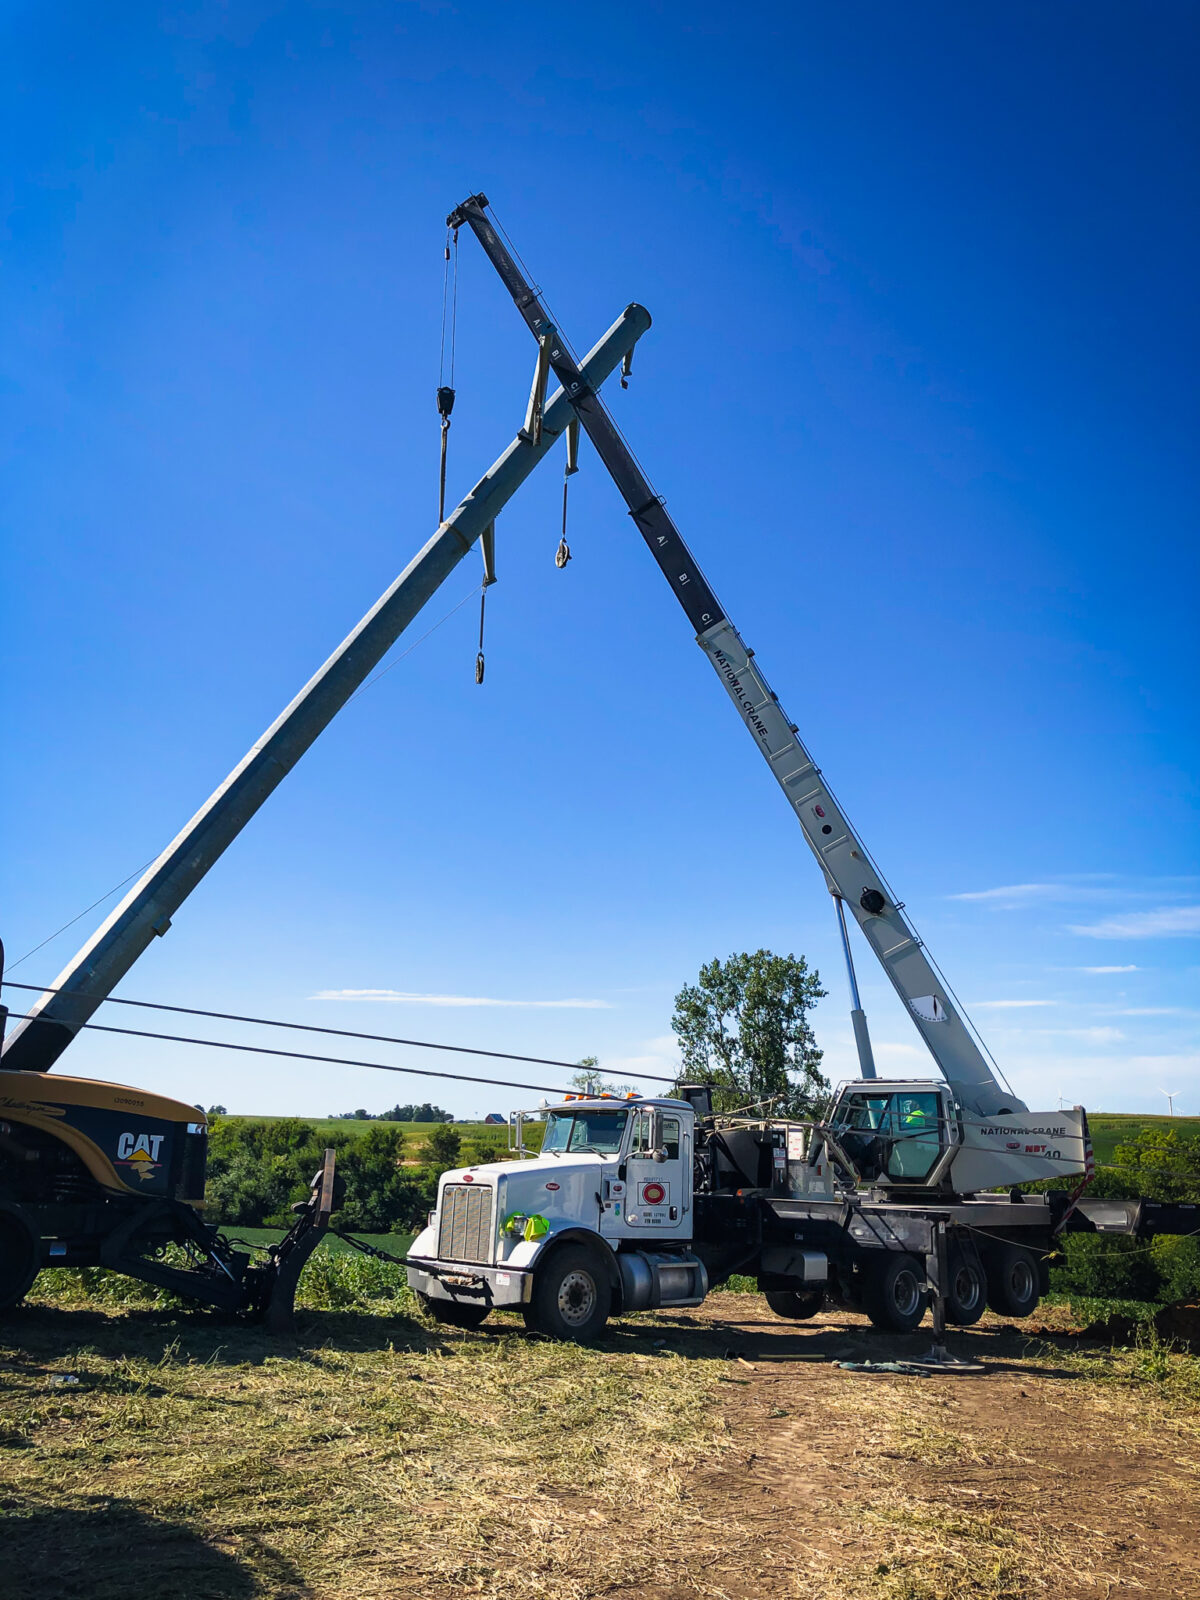 Crane truck in green farming filed with boom lifting transmission pole